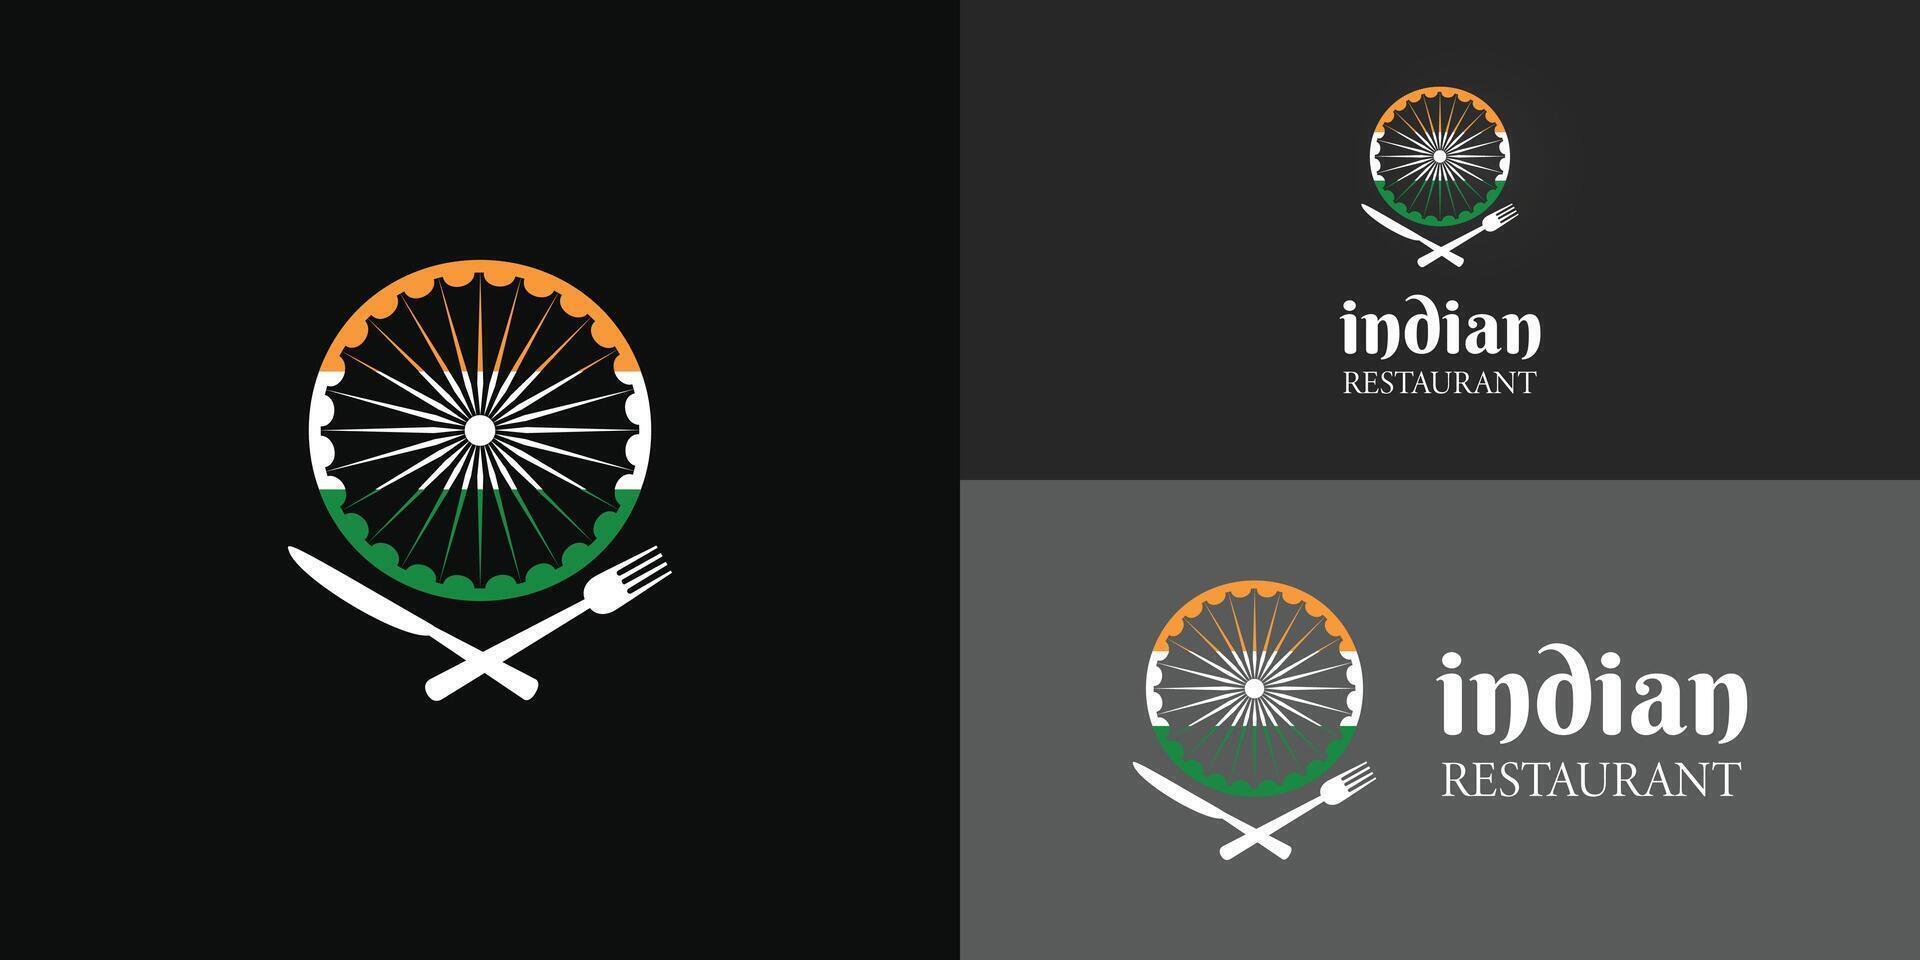 Abstract wheel logo with an ornament of the India Flag presented with multiple black background colors. The logo is suitable for Indian restaurant business logo design inspiration template vector